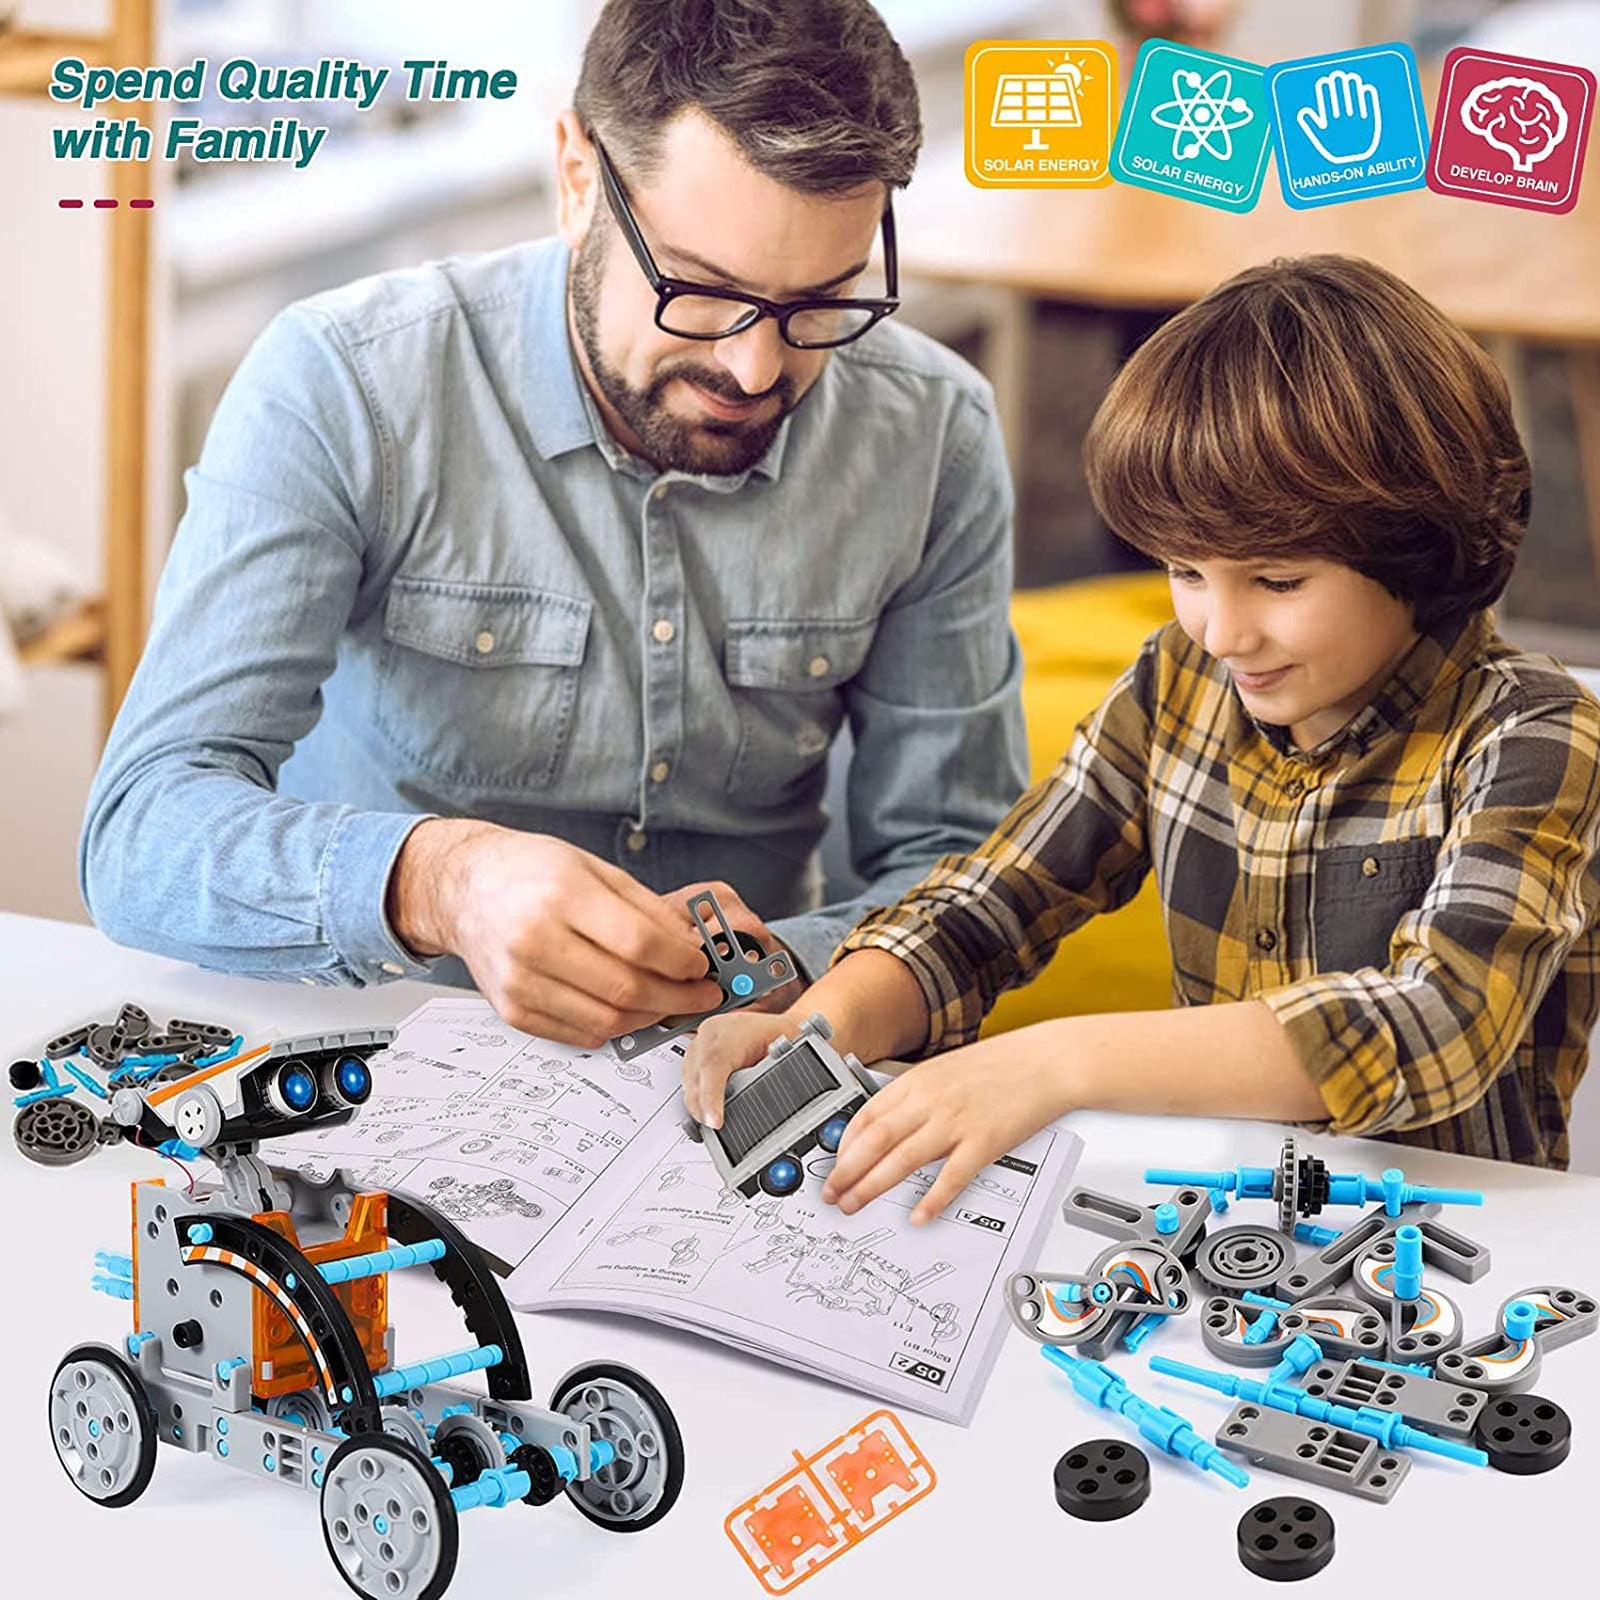 Lucky Doug 12-in-1 STEM Solar Robot Kit Toys Gifts for Kids 8 9 10 11 12 13 Years Old, Educational Building Science Experiment Set Gifts for Kids Boys Girls